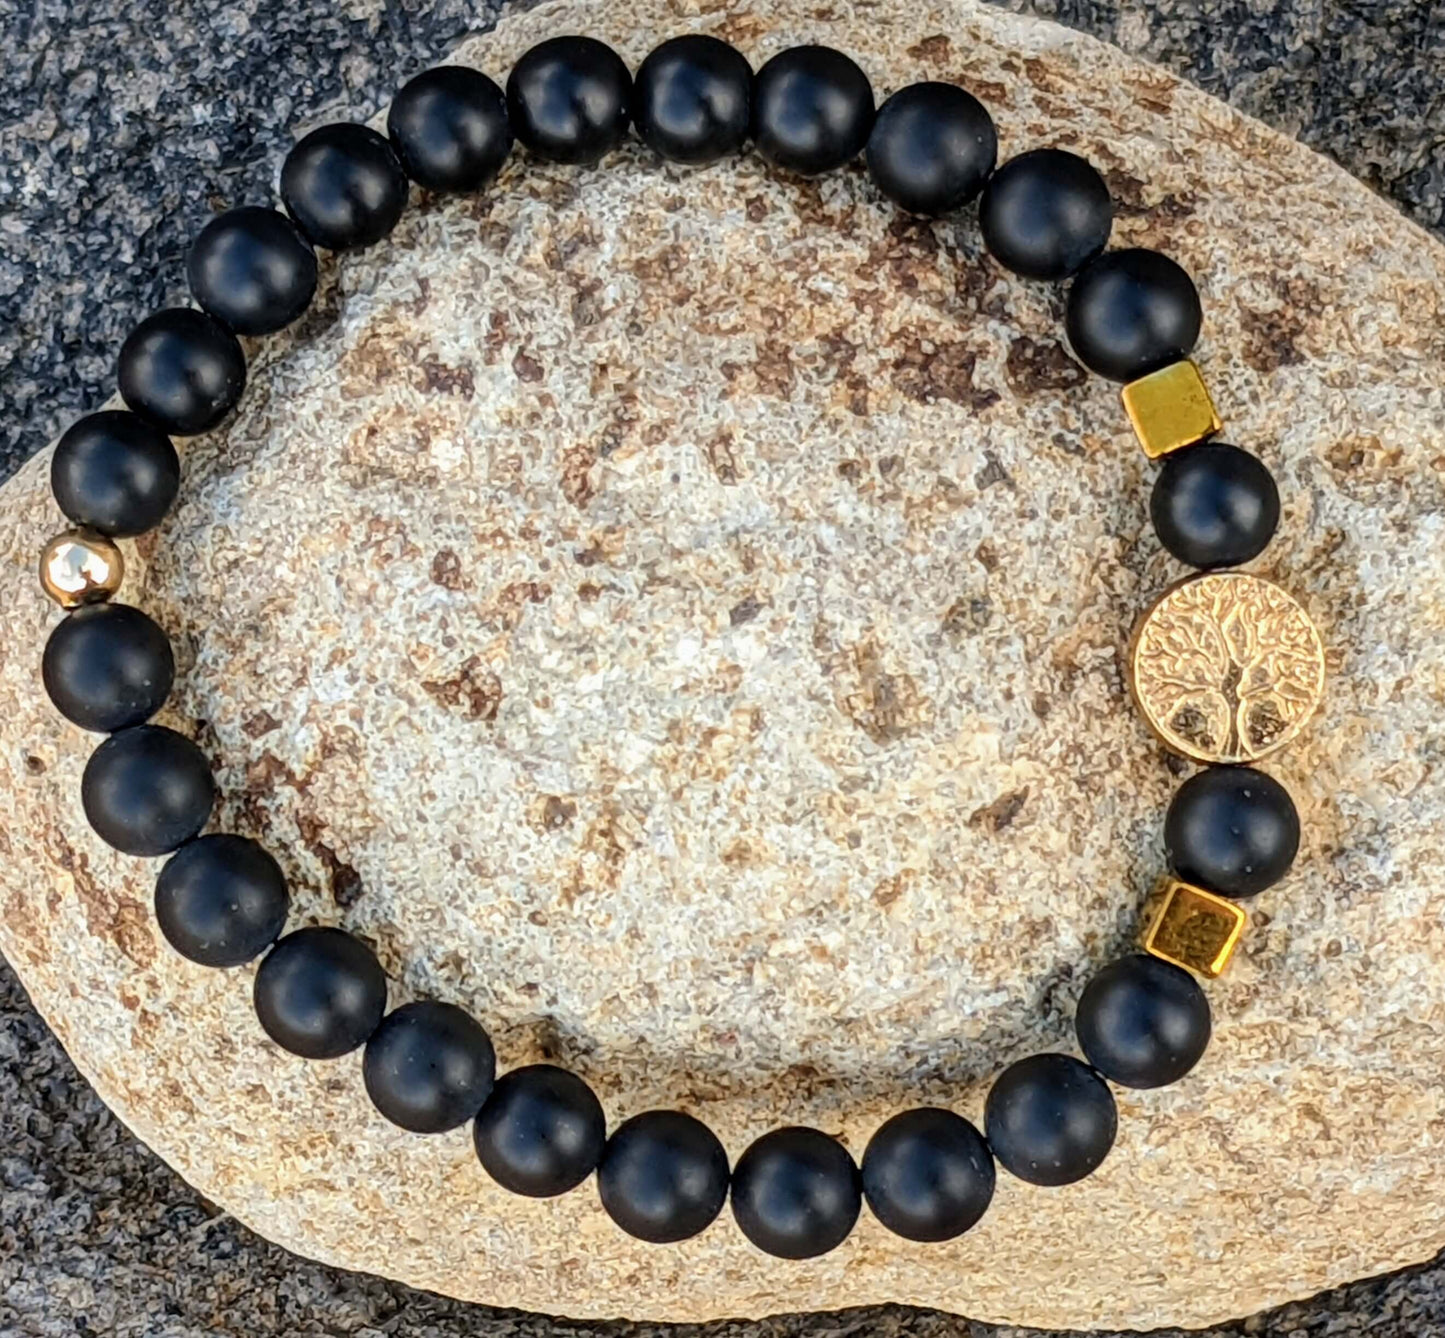 Black Onyx (6mm Bead Size) with Tree of Life